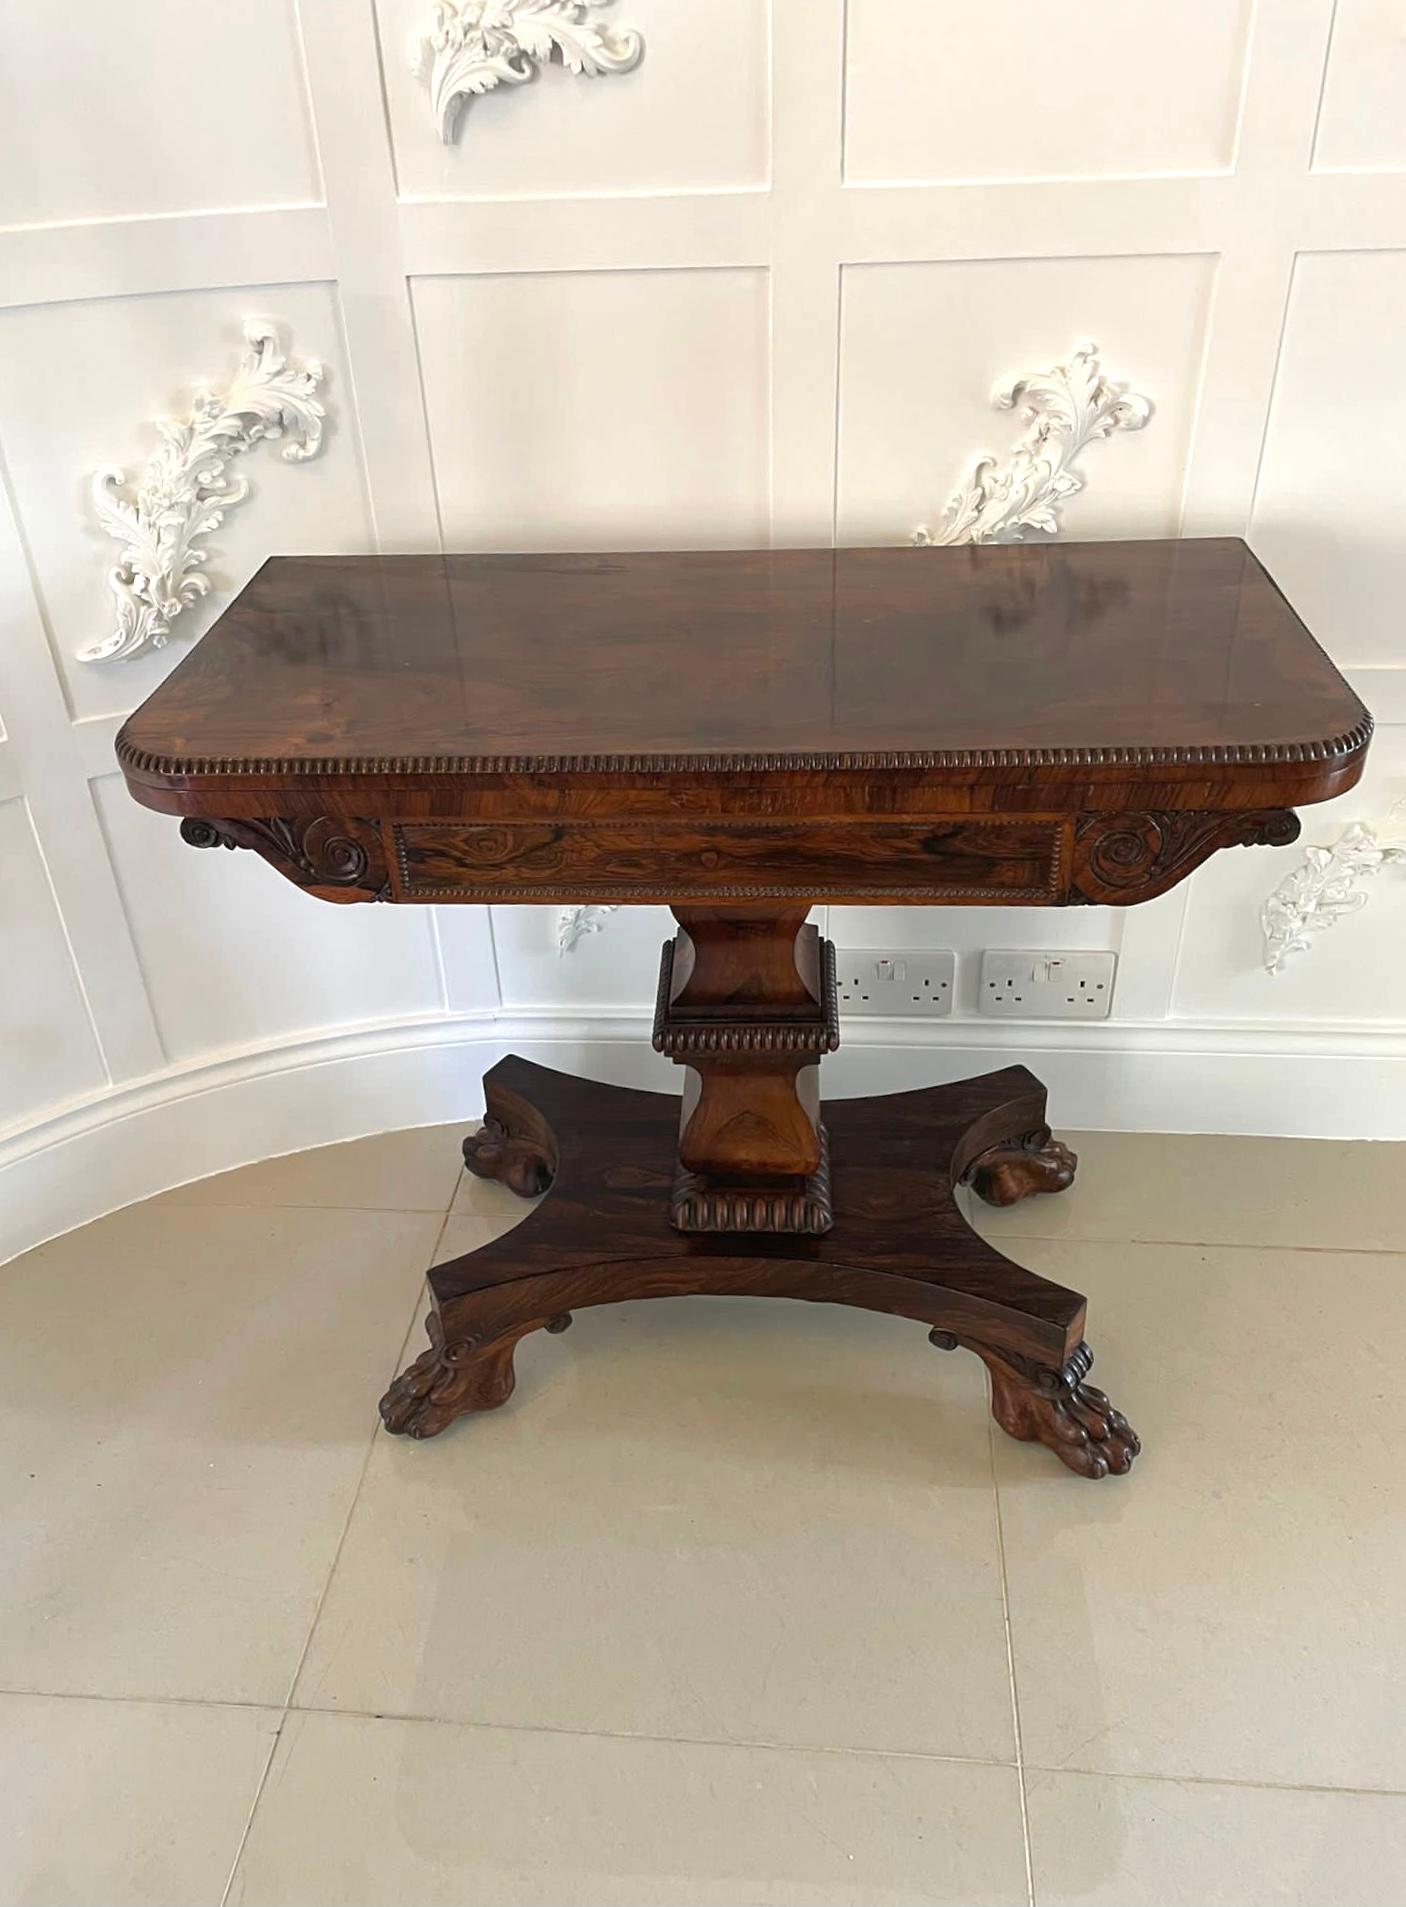 Fine antique William IV rosewood card/side table with a fantastic figured rosewood top that lifts up and swivels to reveal a green baize interior, super carved frieze supported by a lovely shaped figured rosewood pedestal and finishing on a